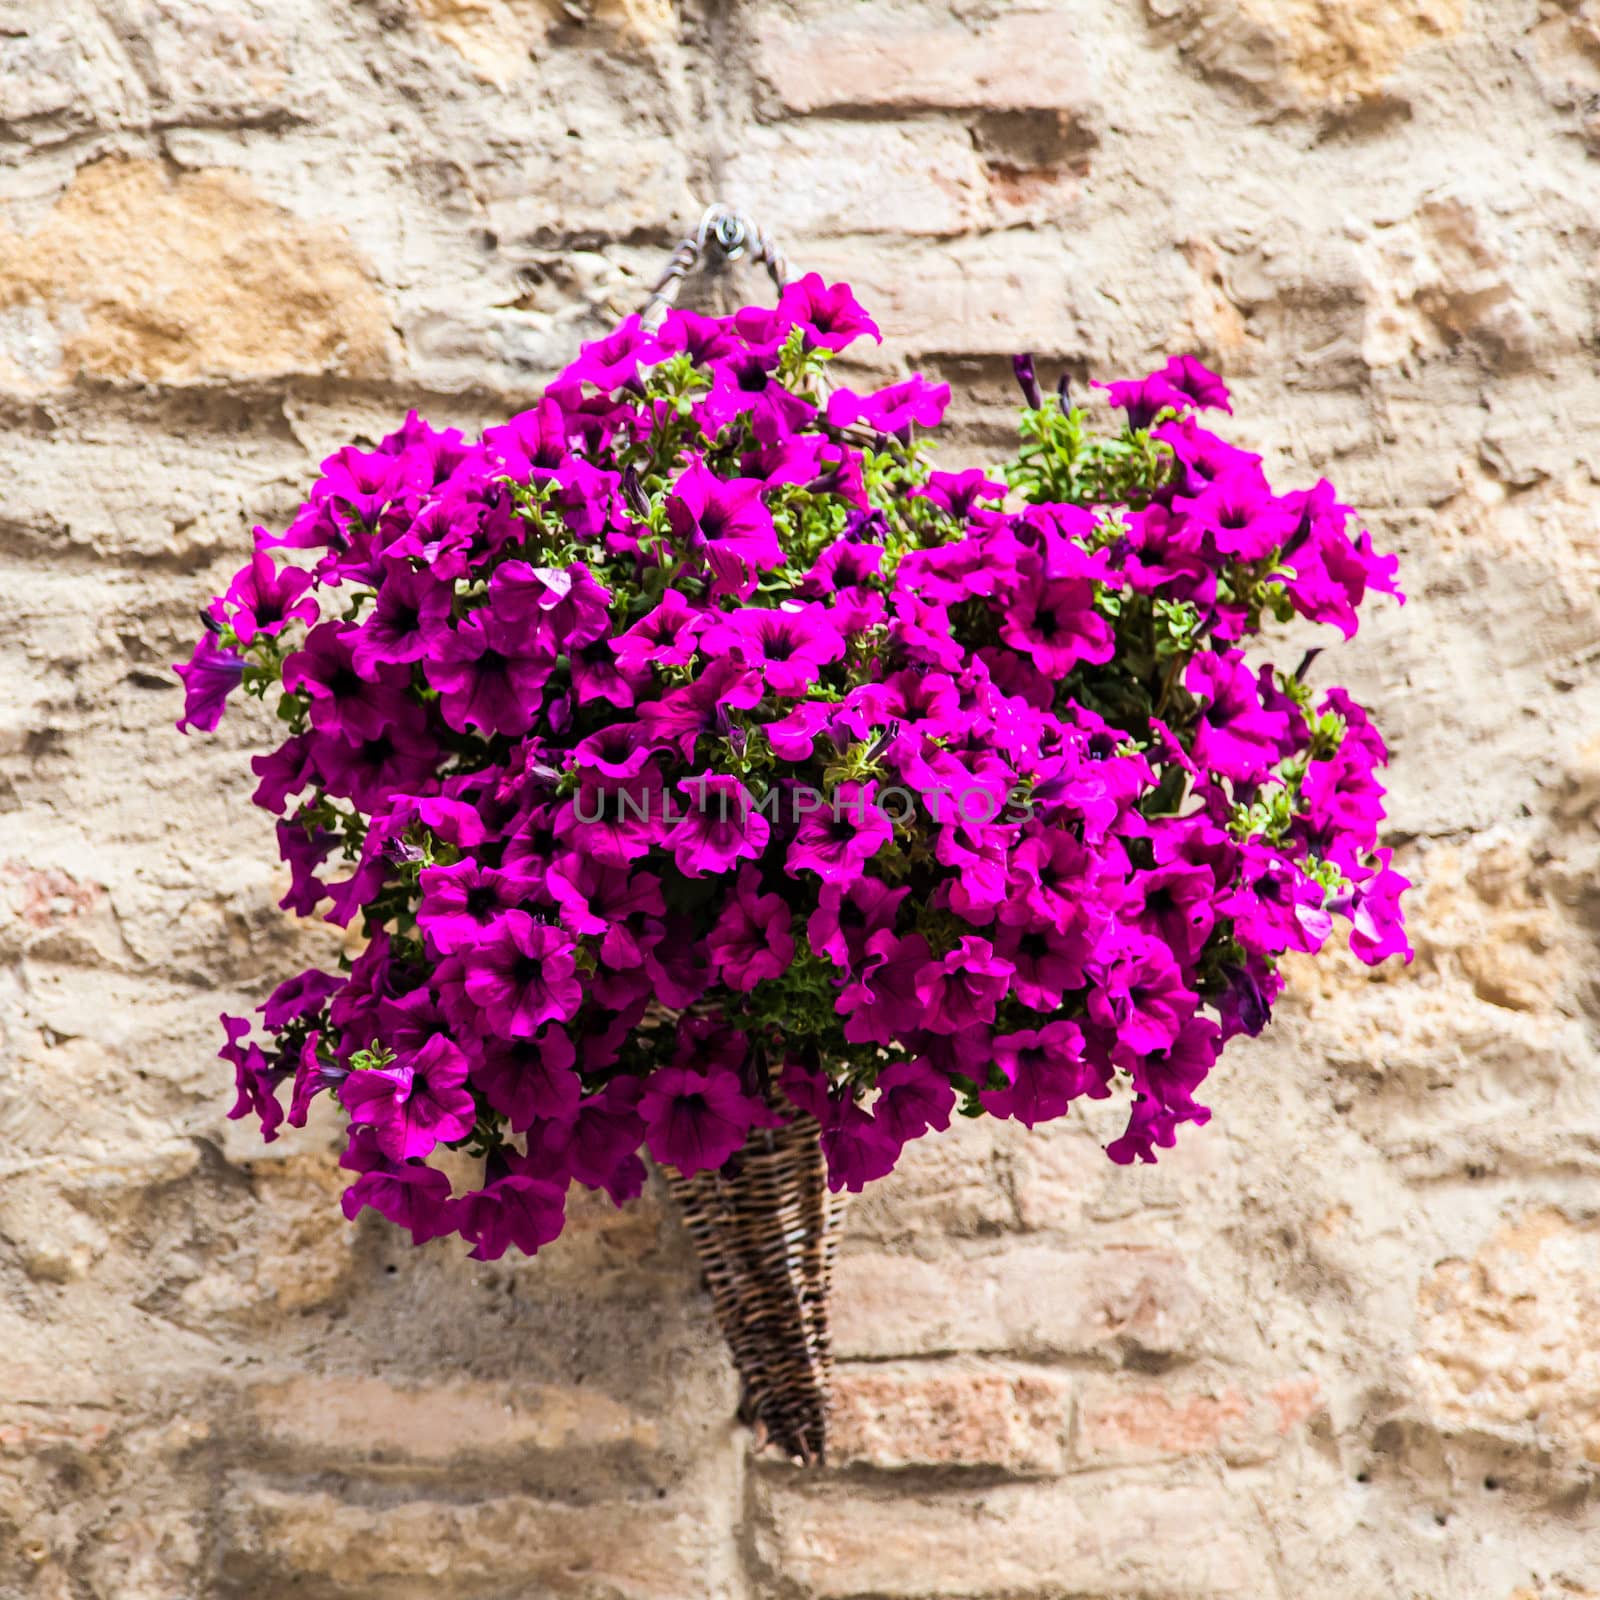 Pienza, Tuscany region, Italy. Old wall with flowers